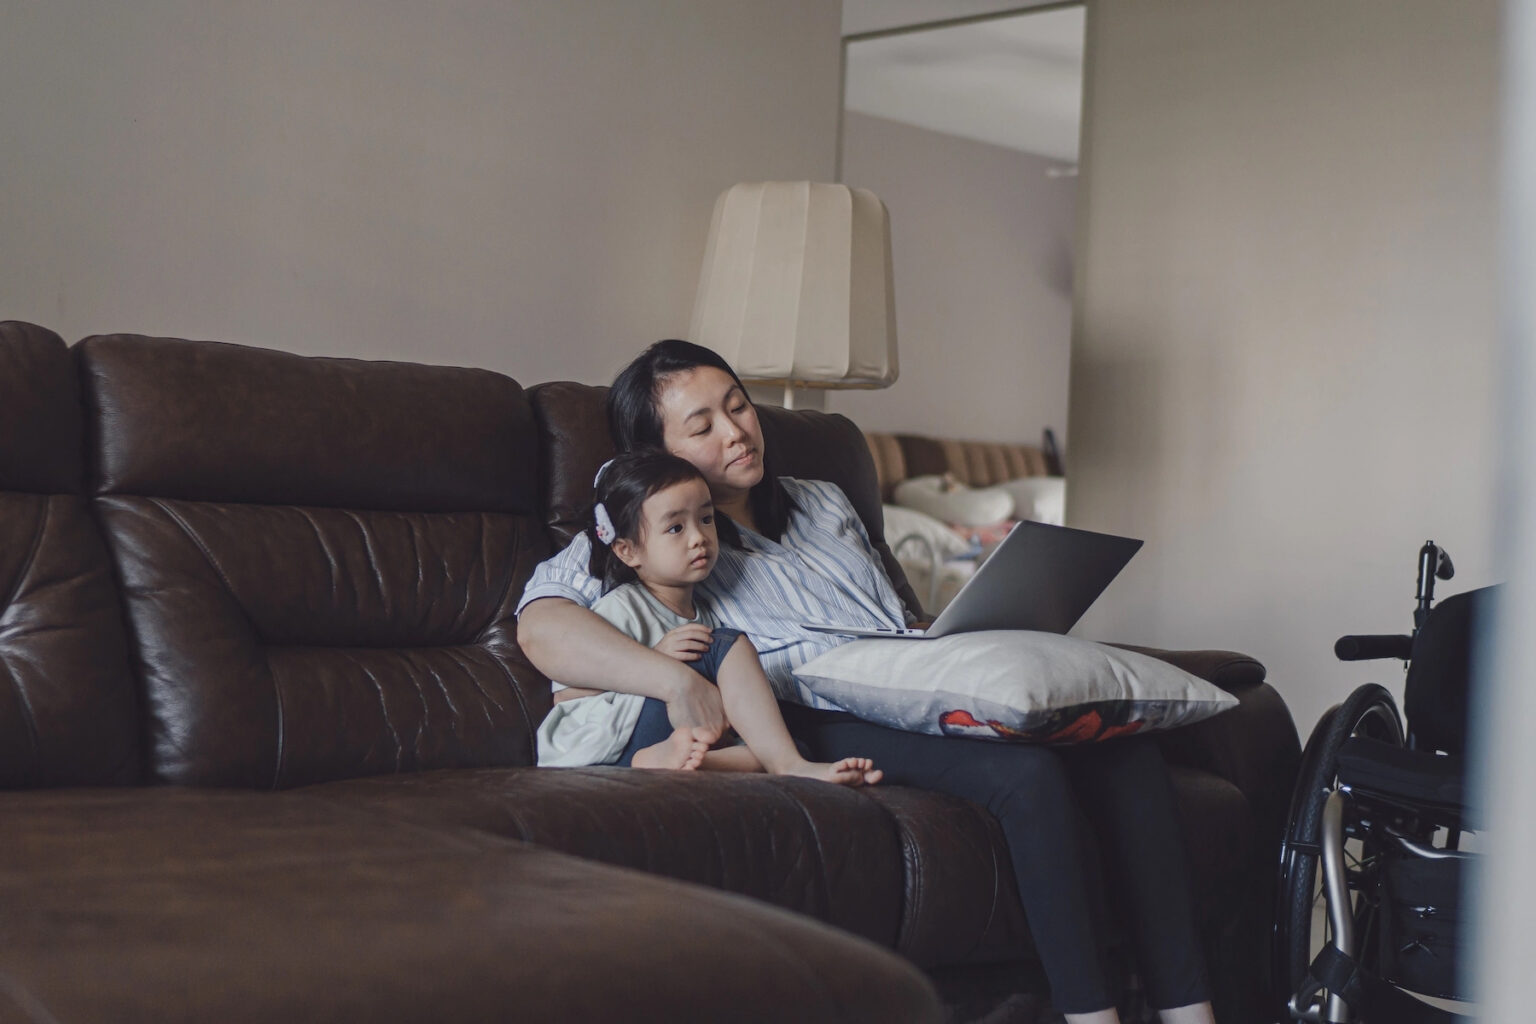 A mother and young daughter sit together on the couch watching a video on a laptop